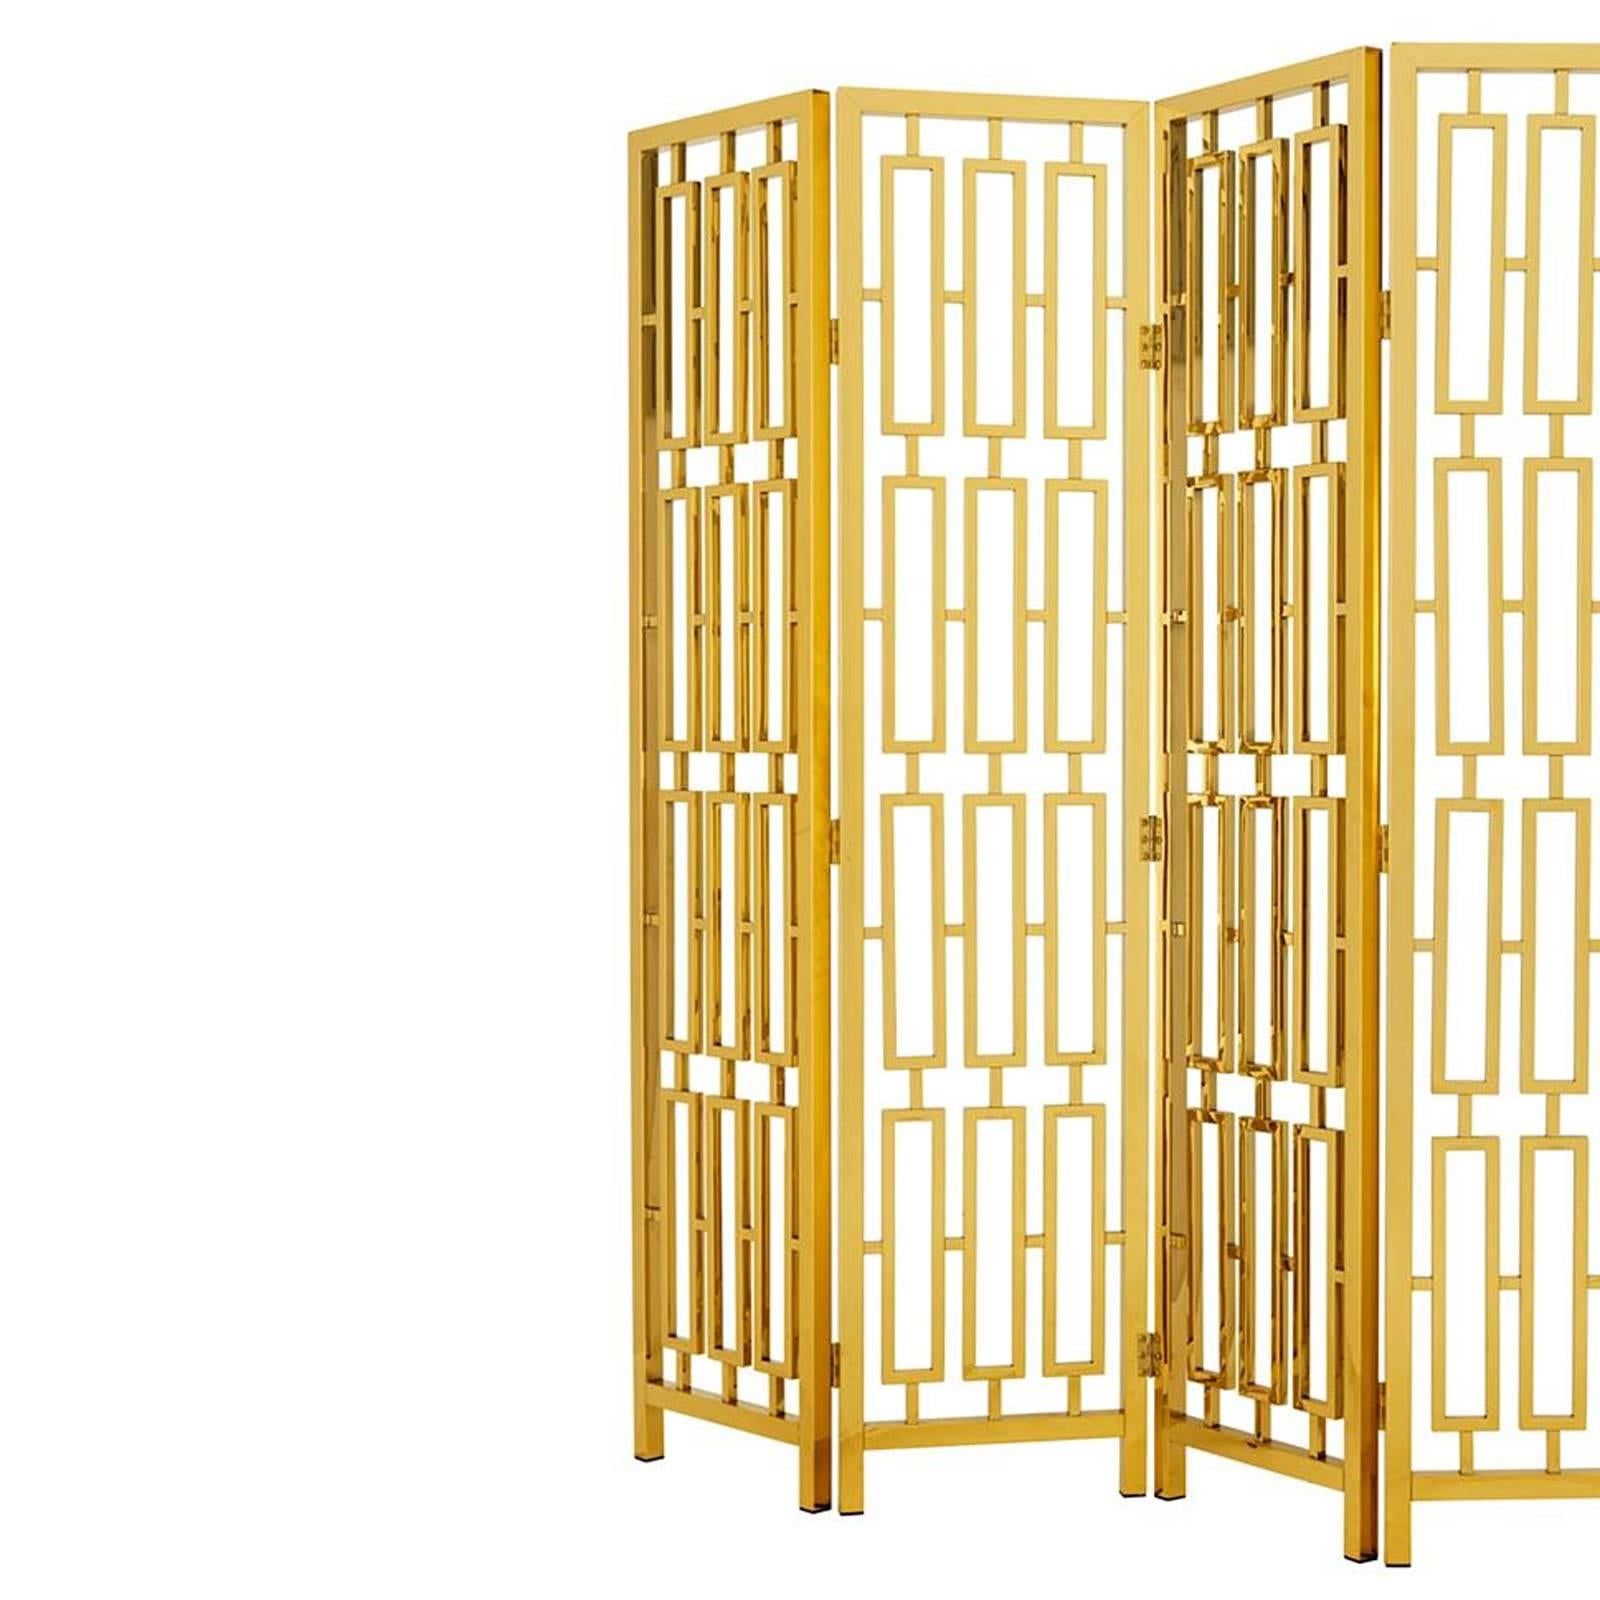 Folding screen golded with
gold finish structure.
